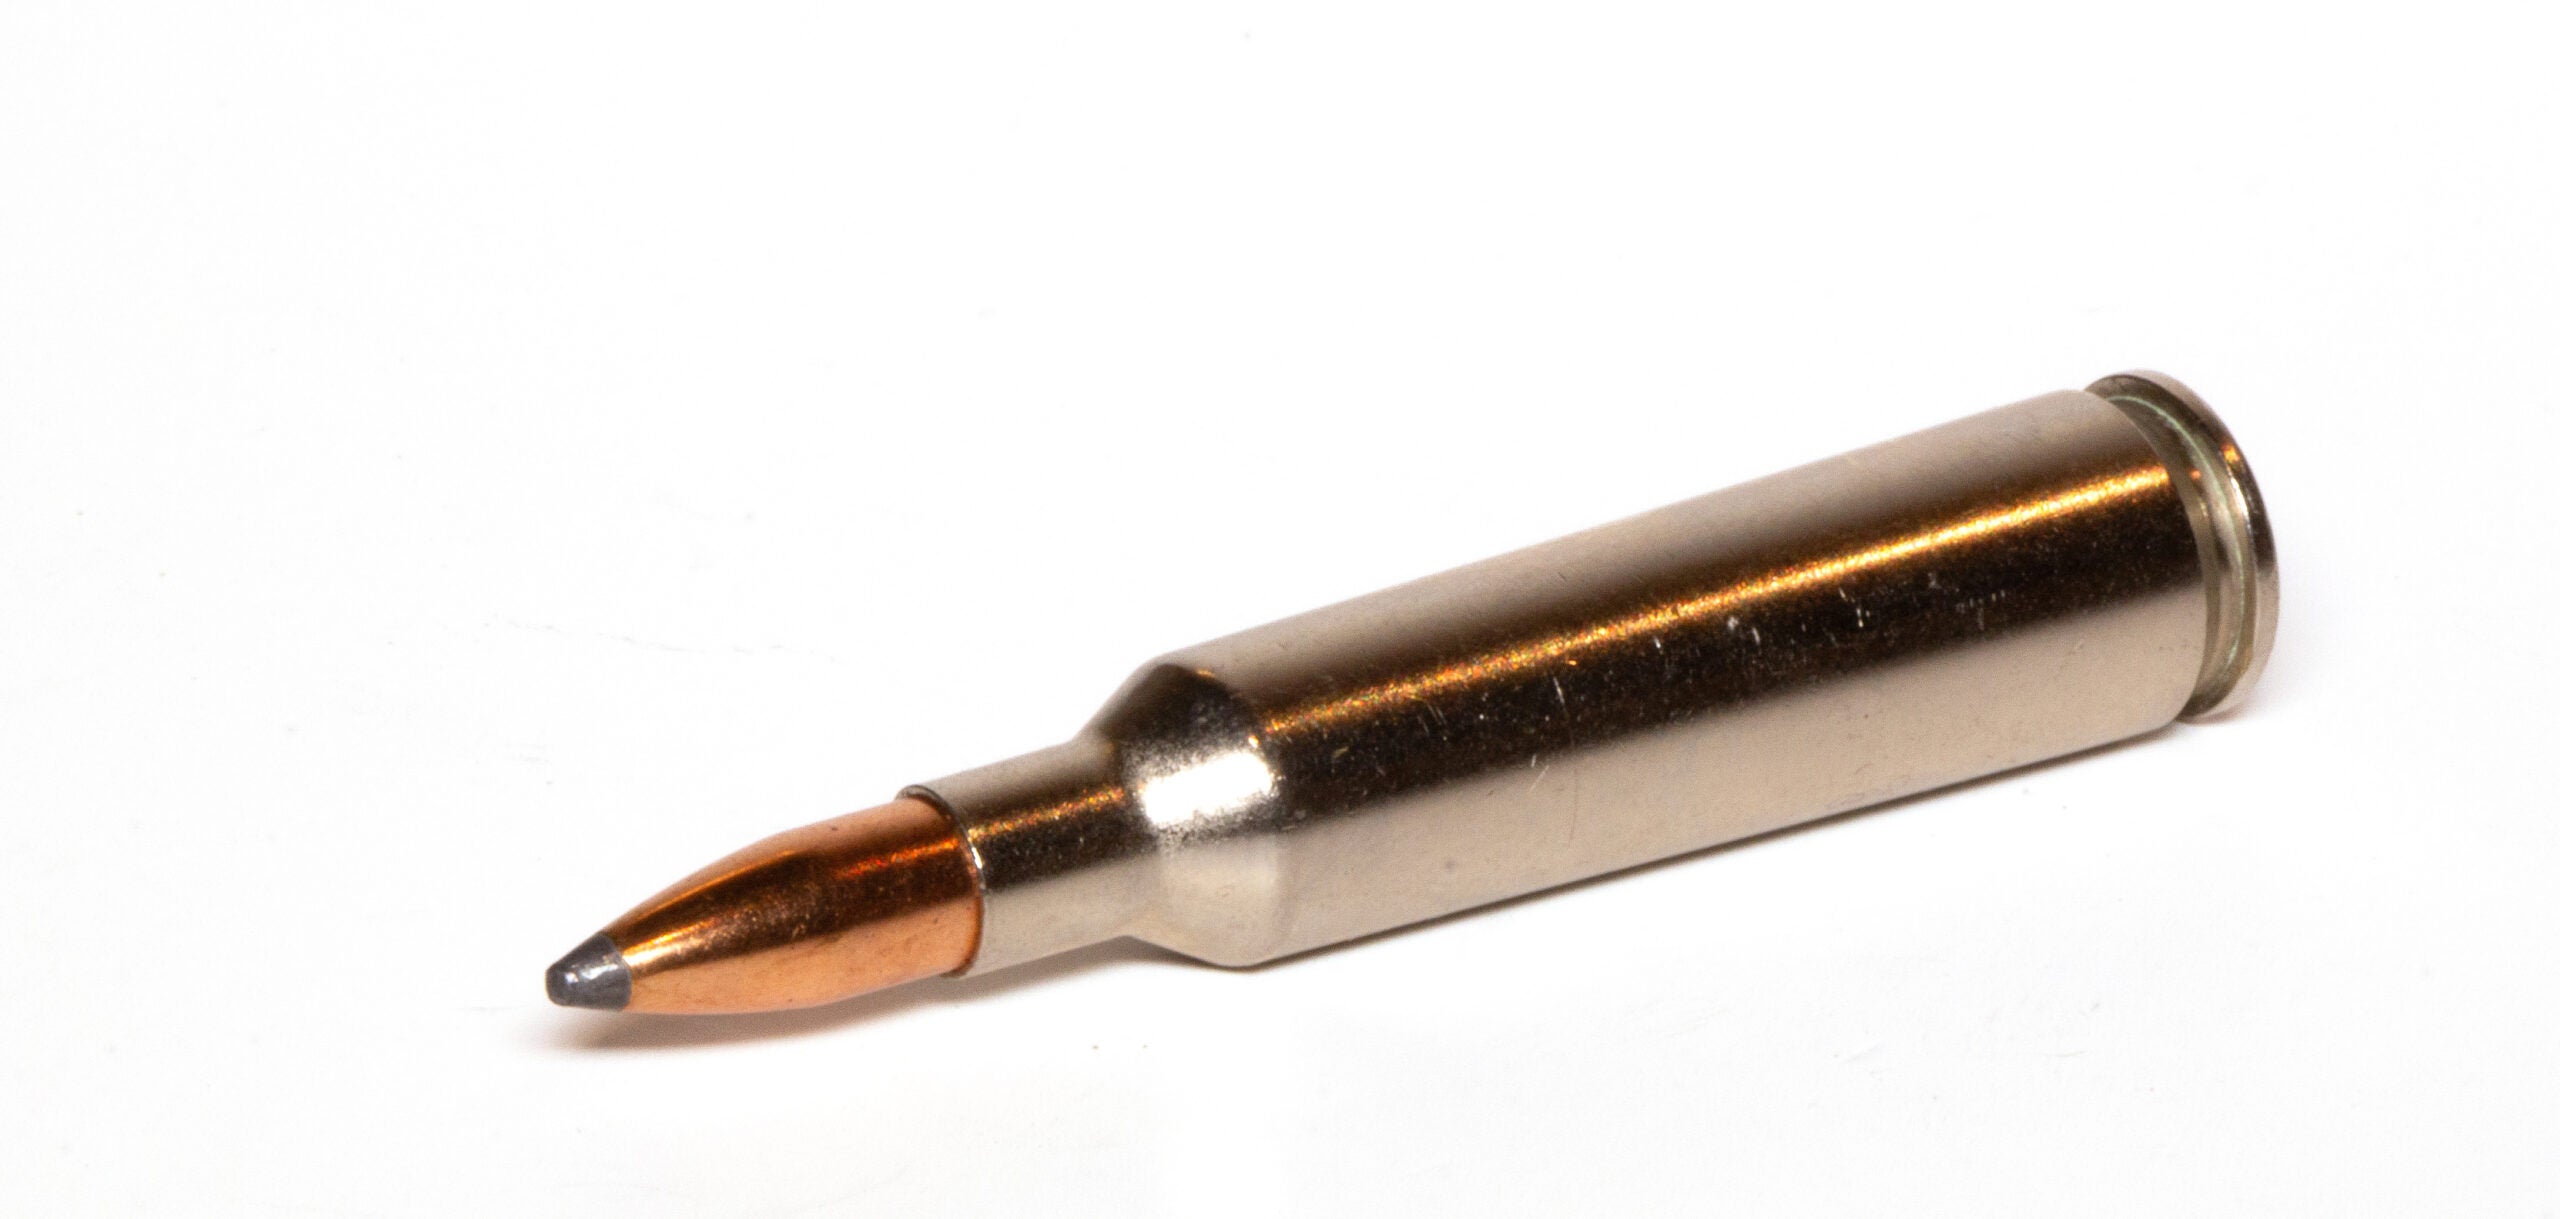 A 22-250 cartridge on white background